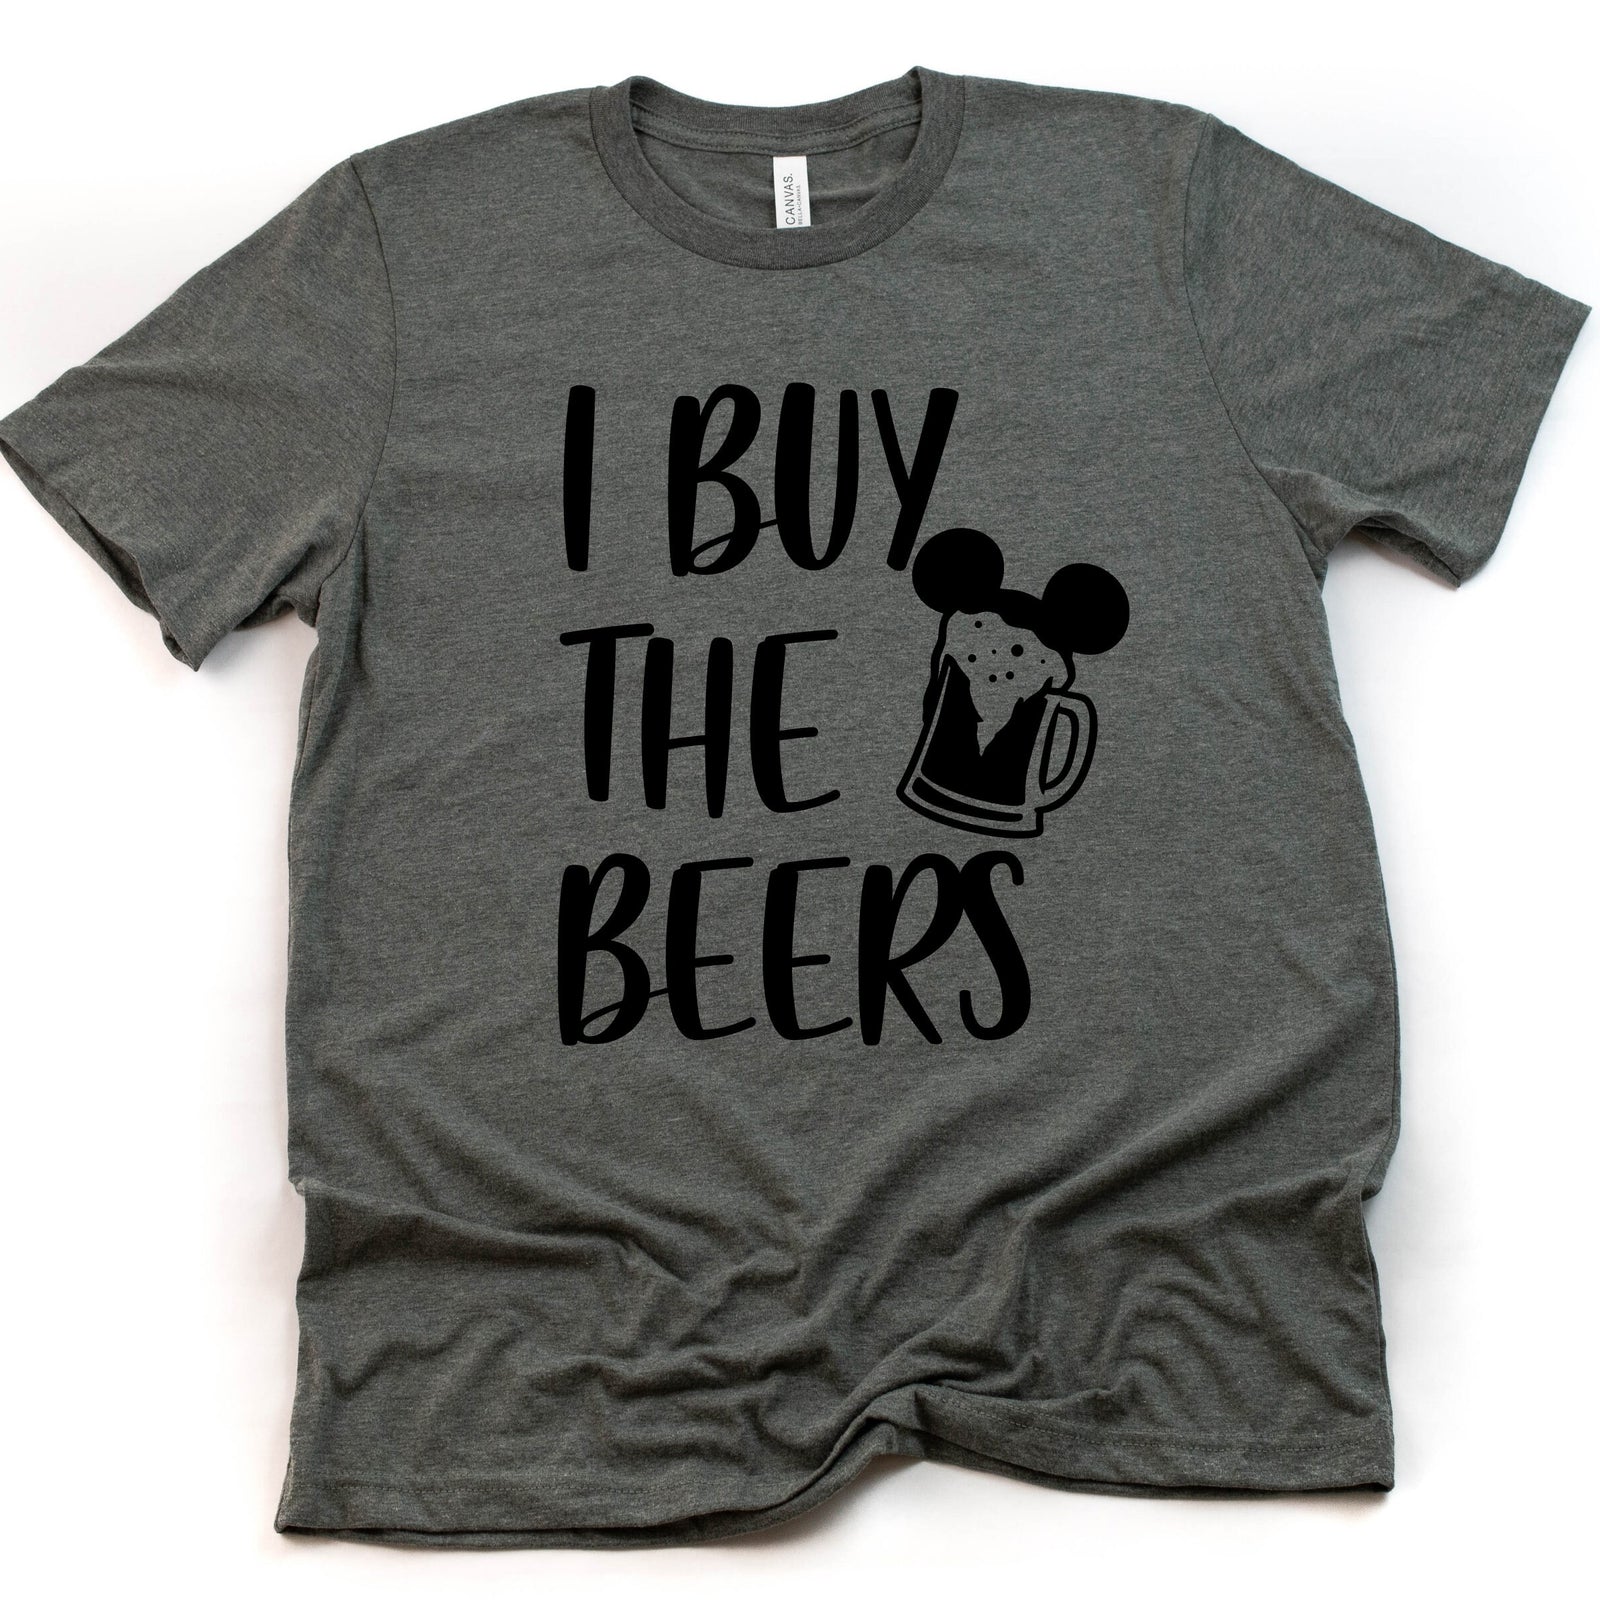 I Buy the Beers Adult Unisex T Shirt - Disney Epcot Drinking Shirt - Fun Tees